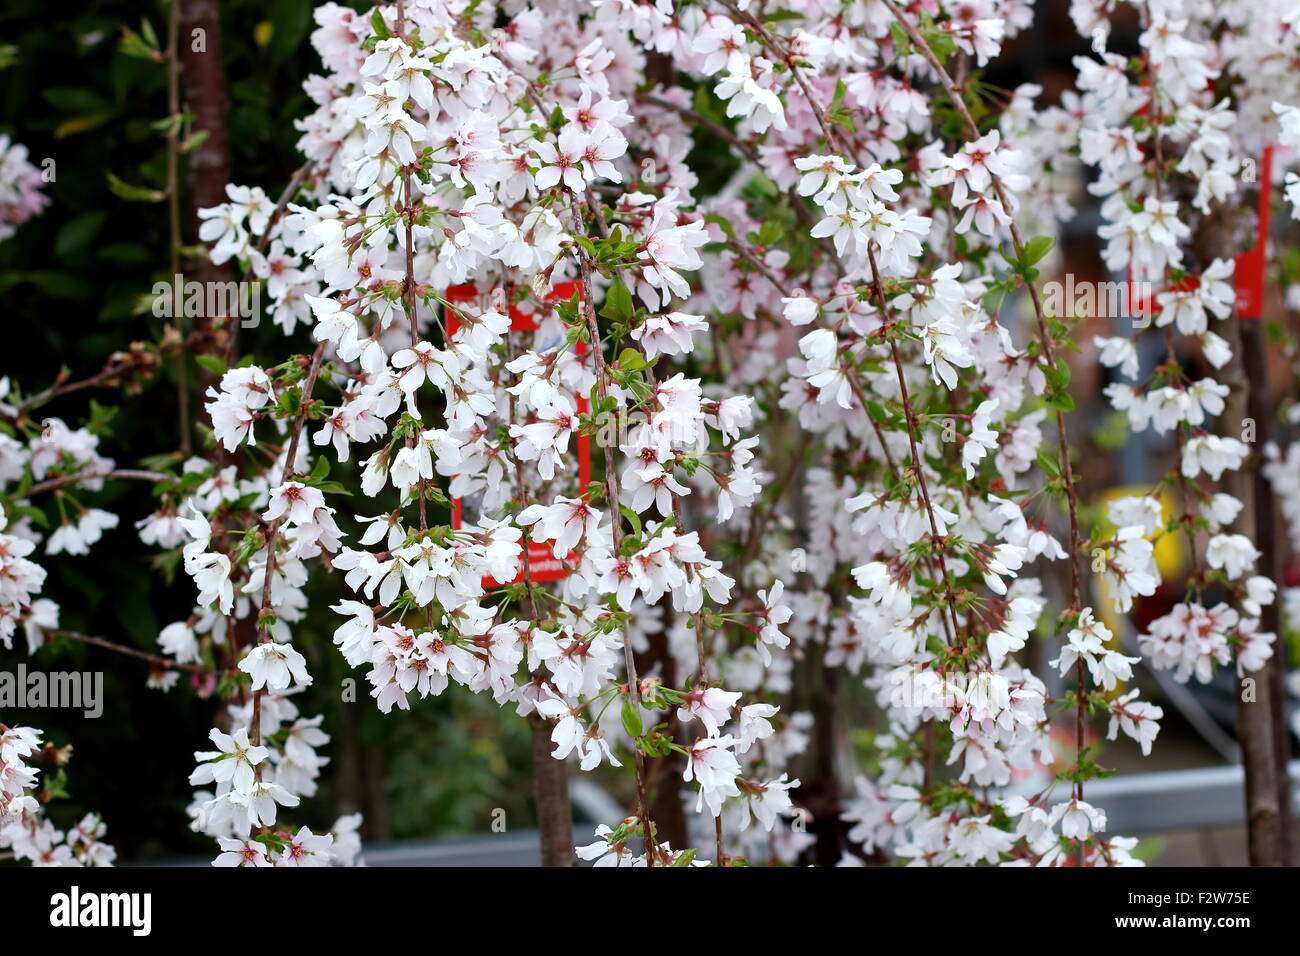 Prunus Snofozam or also known as Snow Fountains Weeping Cherry Stock Photo